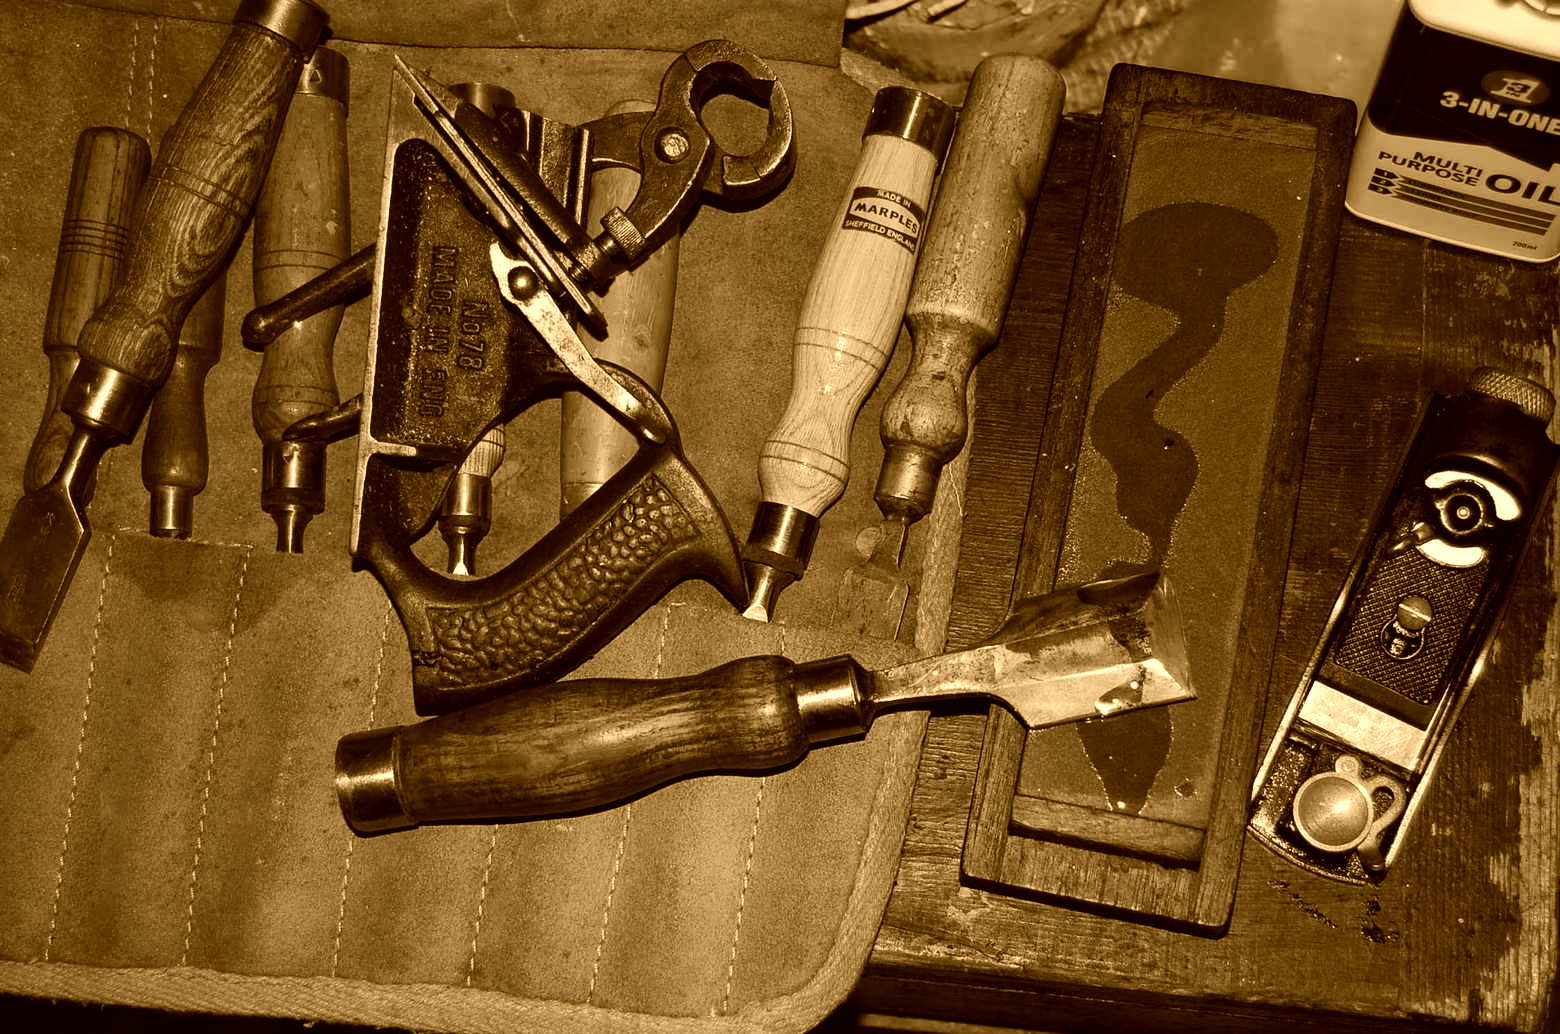 tools over 40 years in the trade